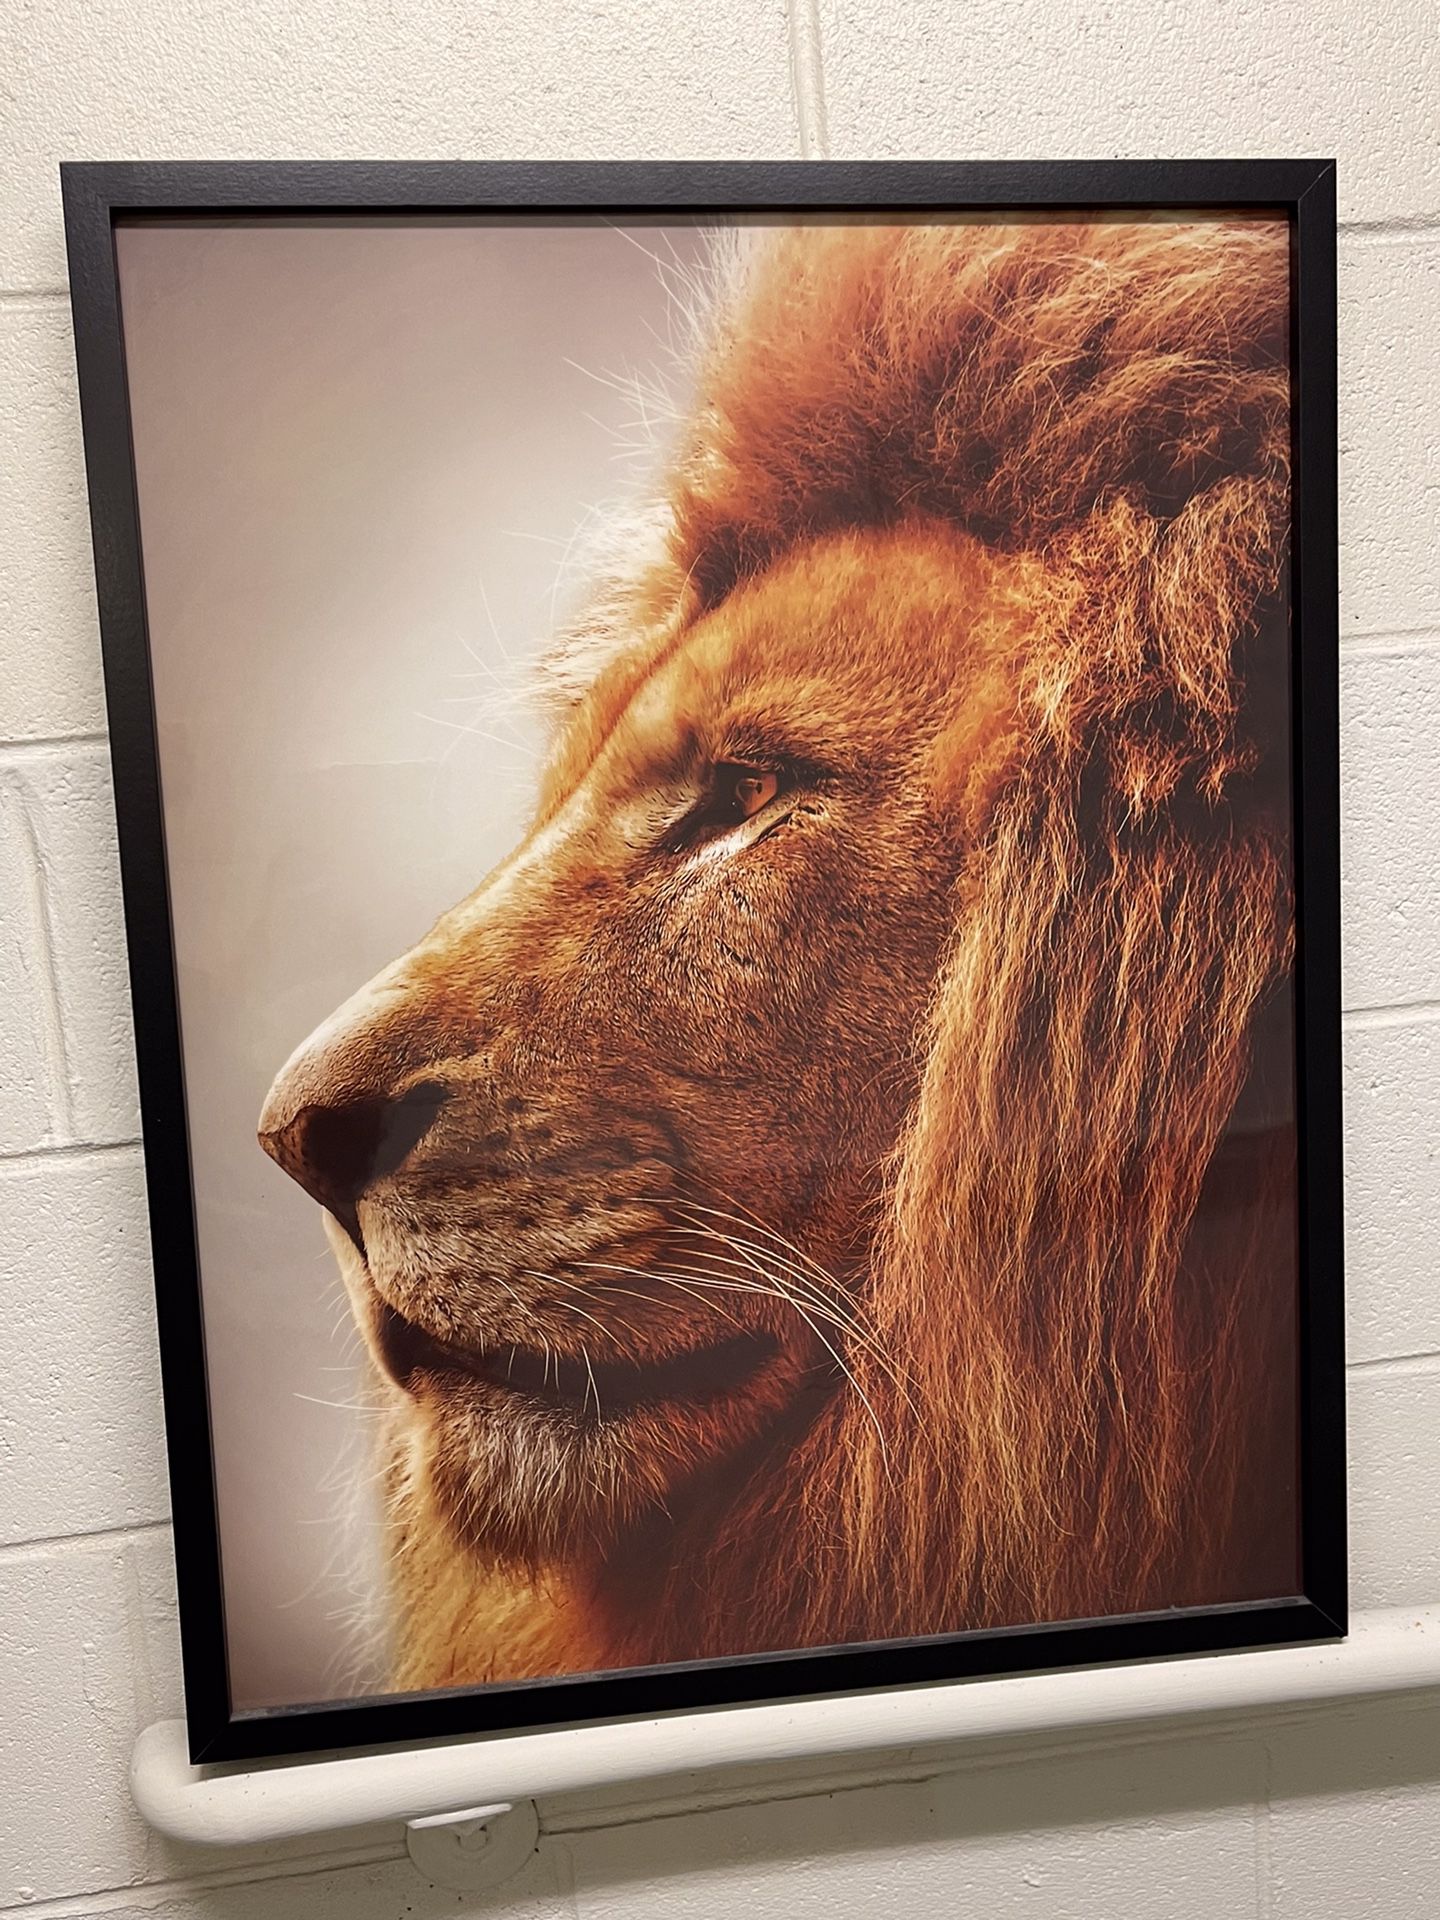 LARGE (29.25" H x 23.25" W x 1.5" Deep) WALL ART - LION HEAD PROFILE - FRAMED PROFESSIONAL PHOTO - firm price